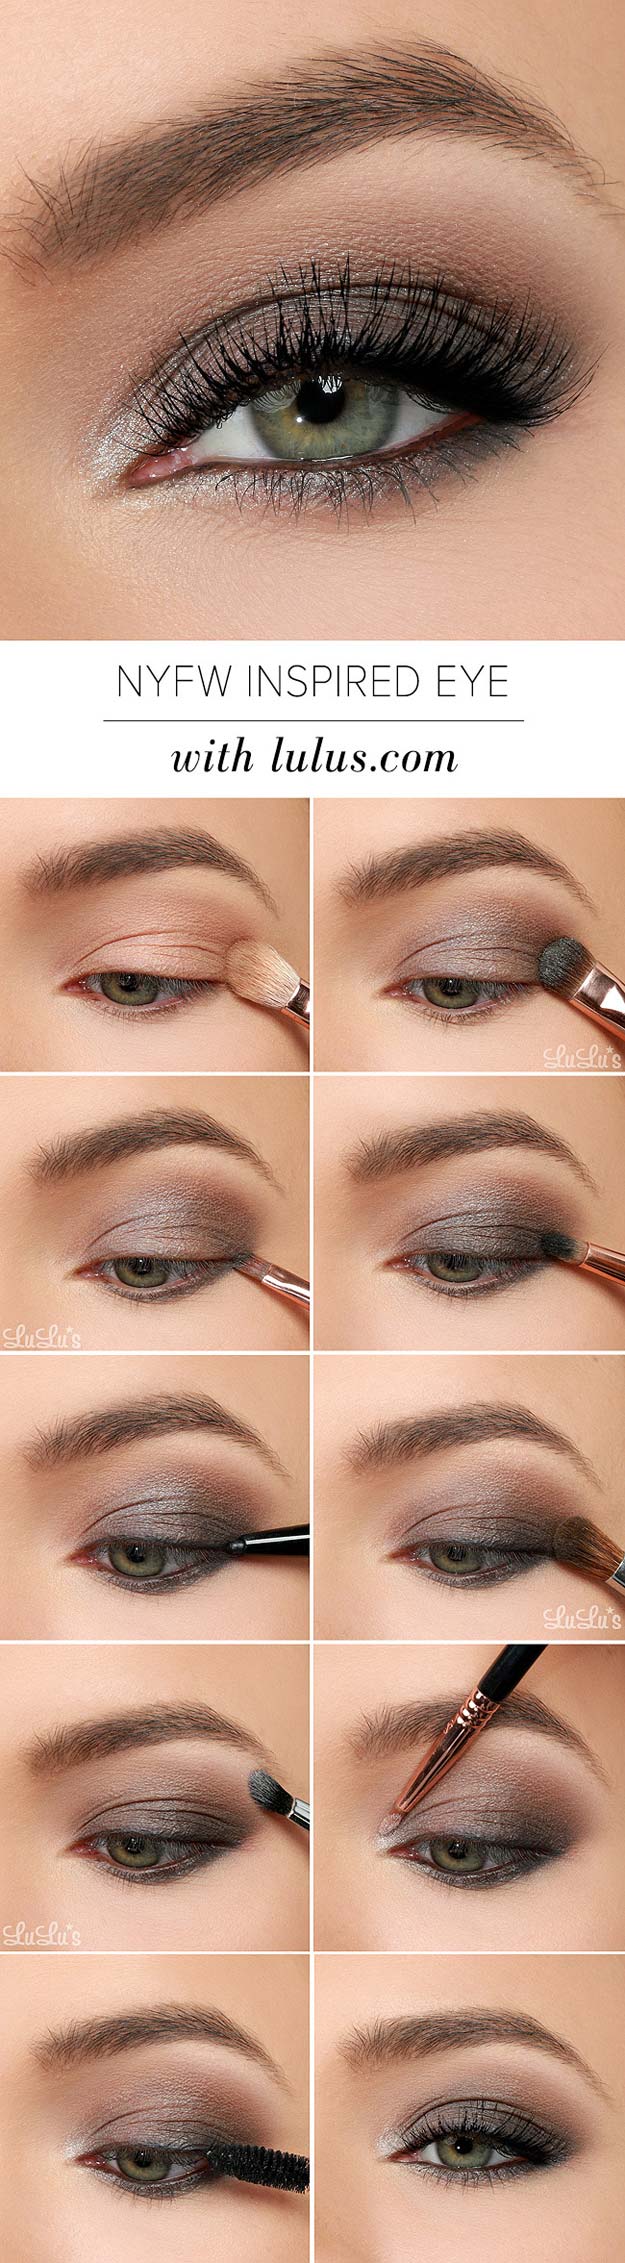 Best Eyeshadow Tutorials - NYFW Inspired Eye Shadow Tutorial - Easy Step by Step How To For Eye Shadow - Cool Makeup Tricks and Eye Makeup Tutorial With Instructions - Quick Ways to Do Smoky Eye, Natural Makeup, Looks for Day and Evening, Brown and Blue Eyes - Cool Ideas for Beginners and Teens 